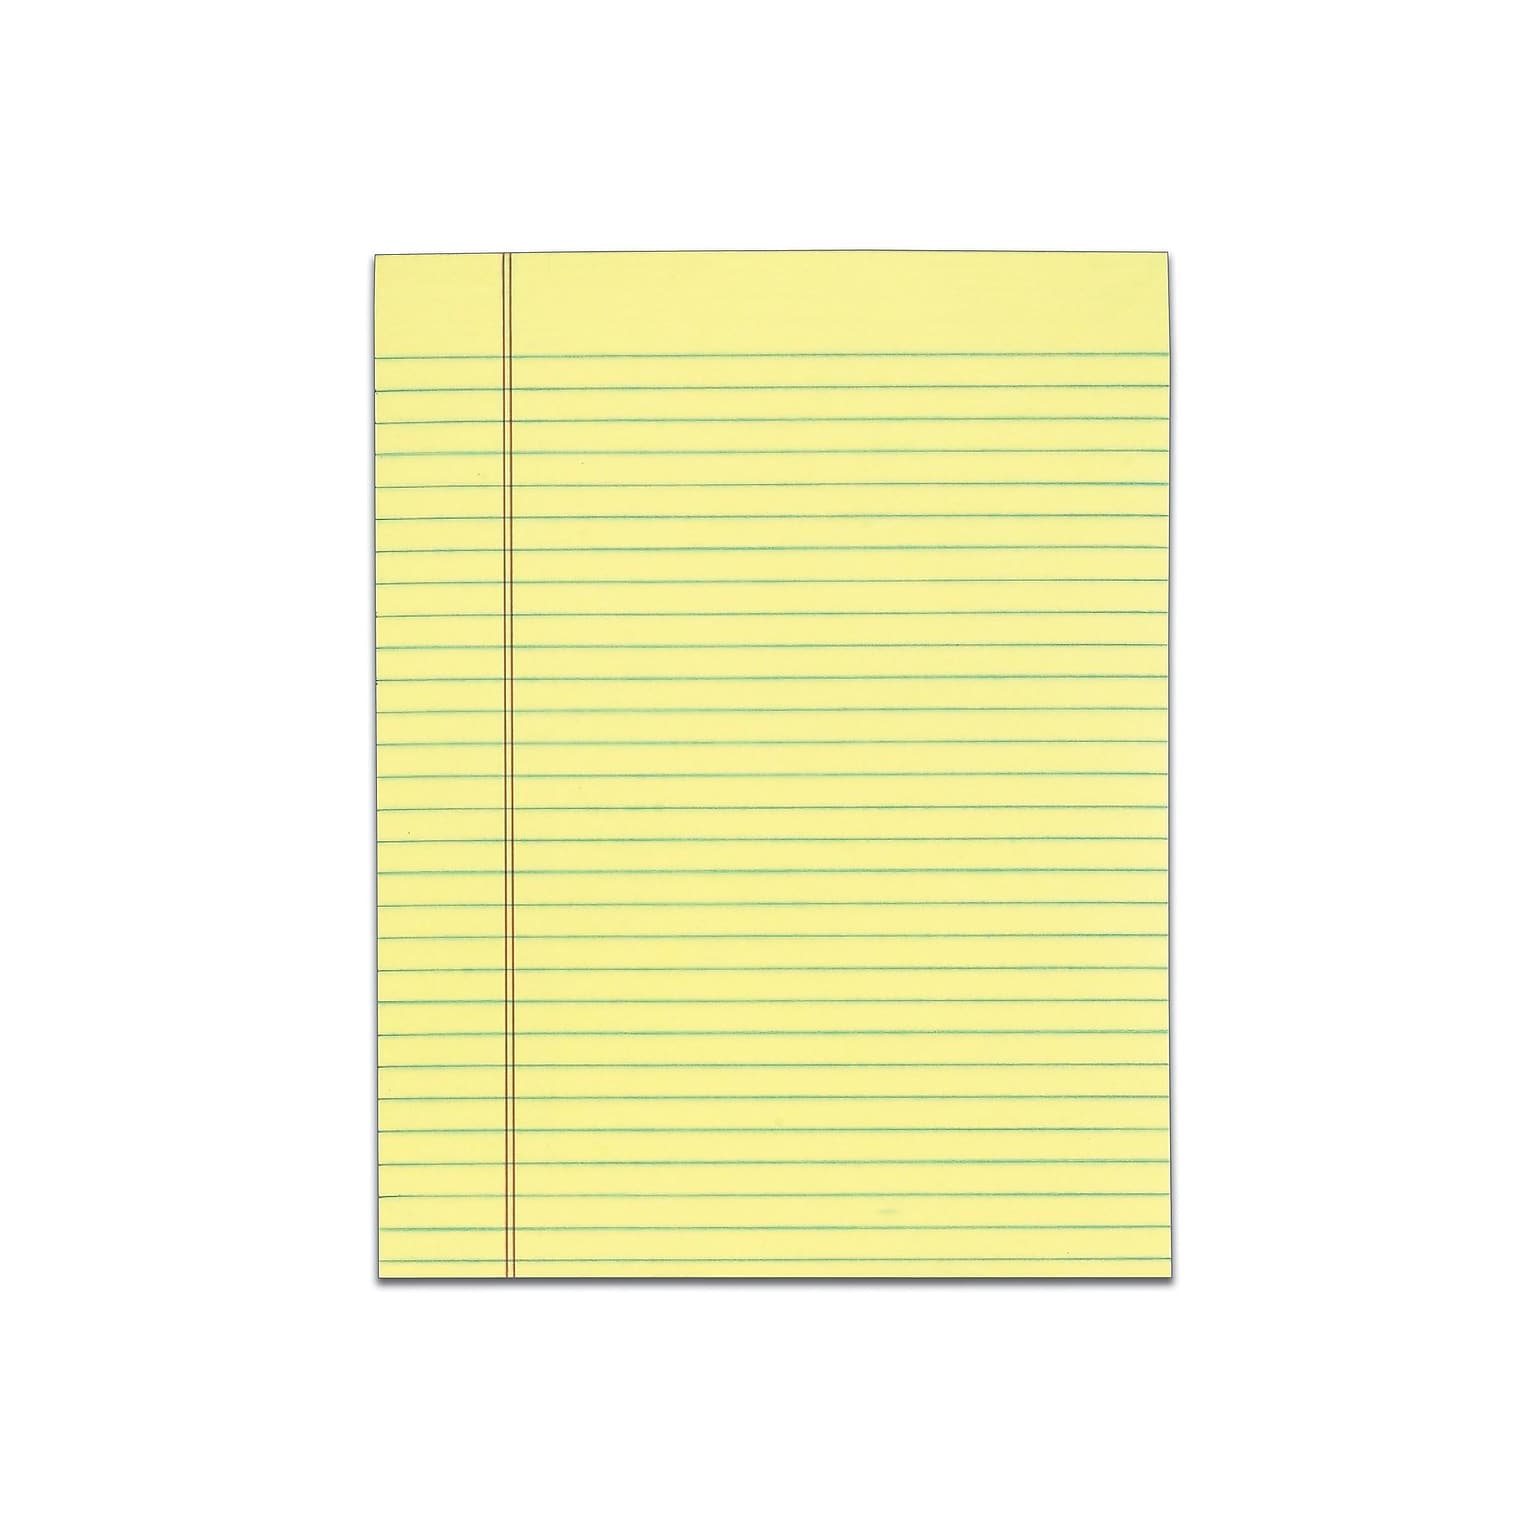 TOPS Legal Notepads, 8.5 x 11, Wide, Canary, 50 Sheets/Pad, 12 Pads/Pack (TOP 7522)